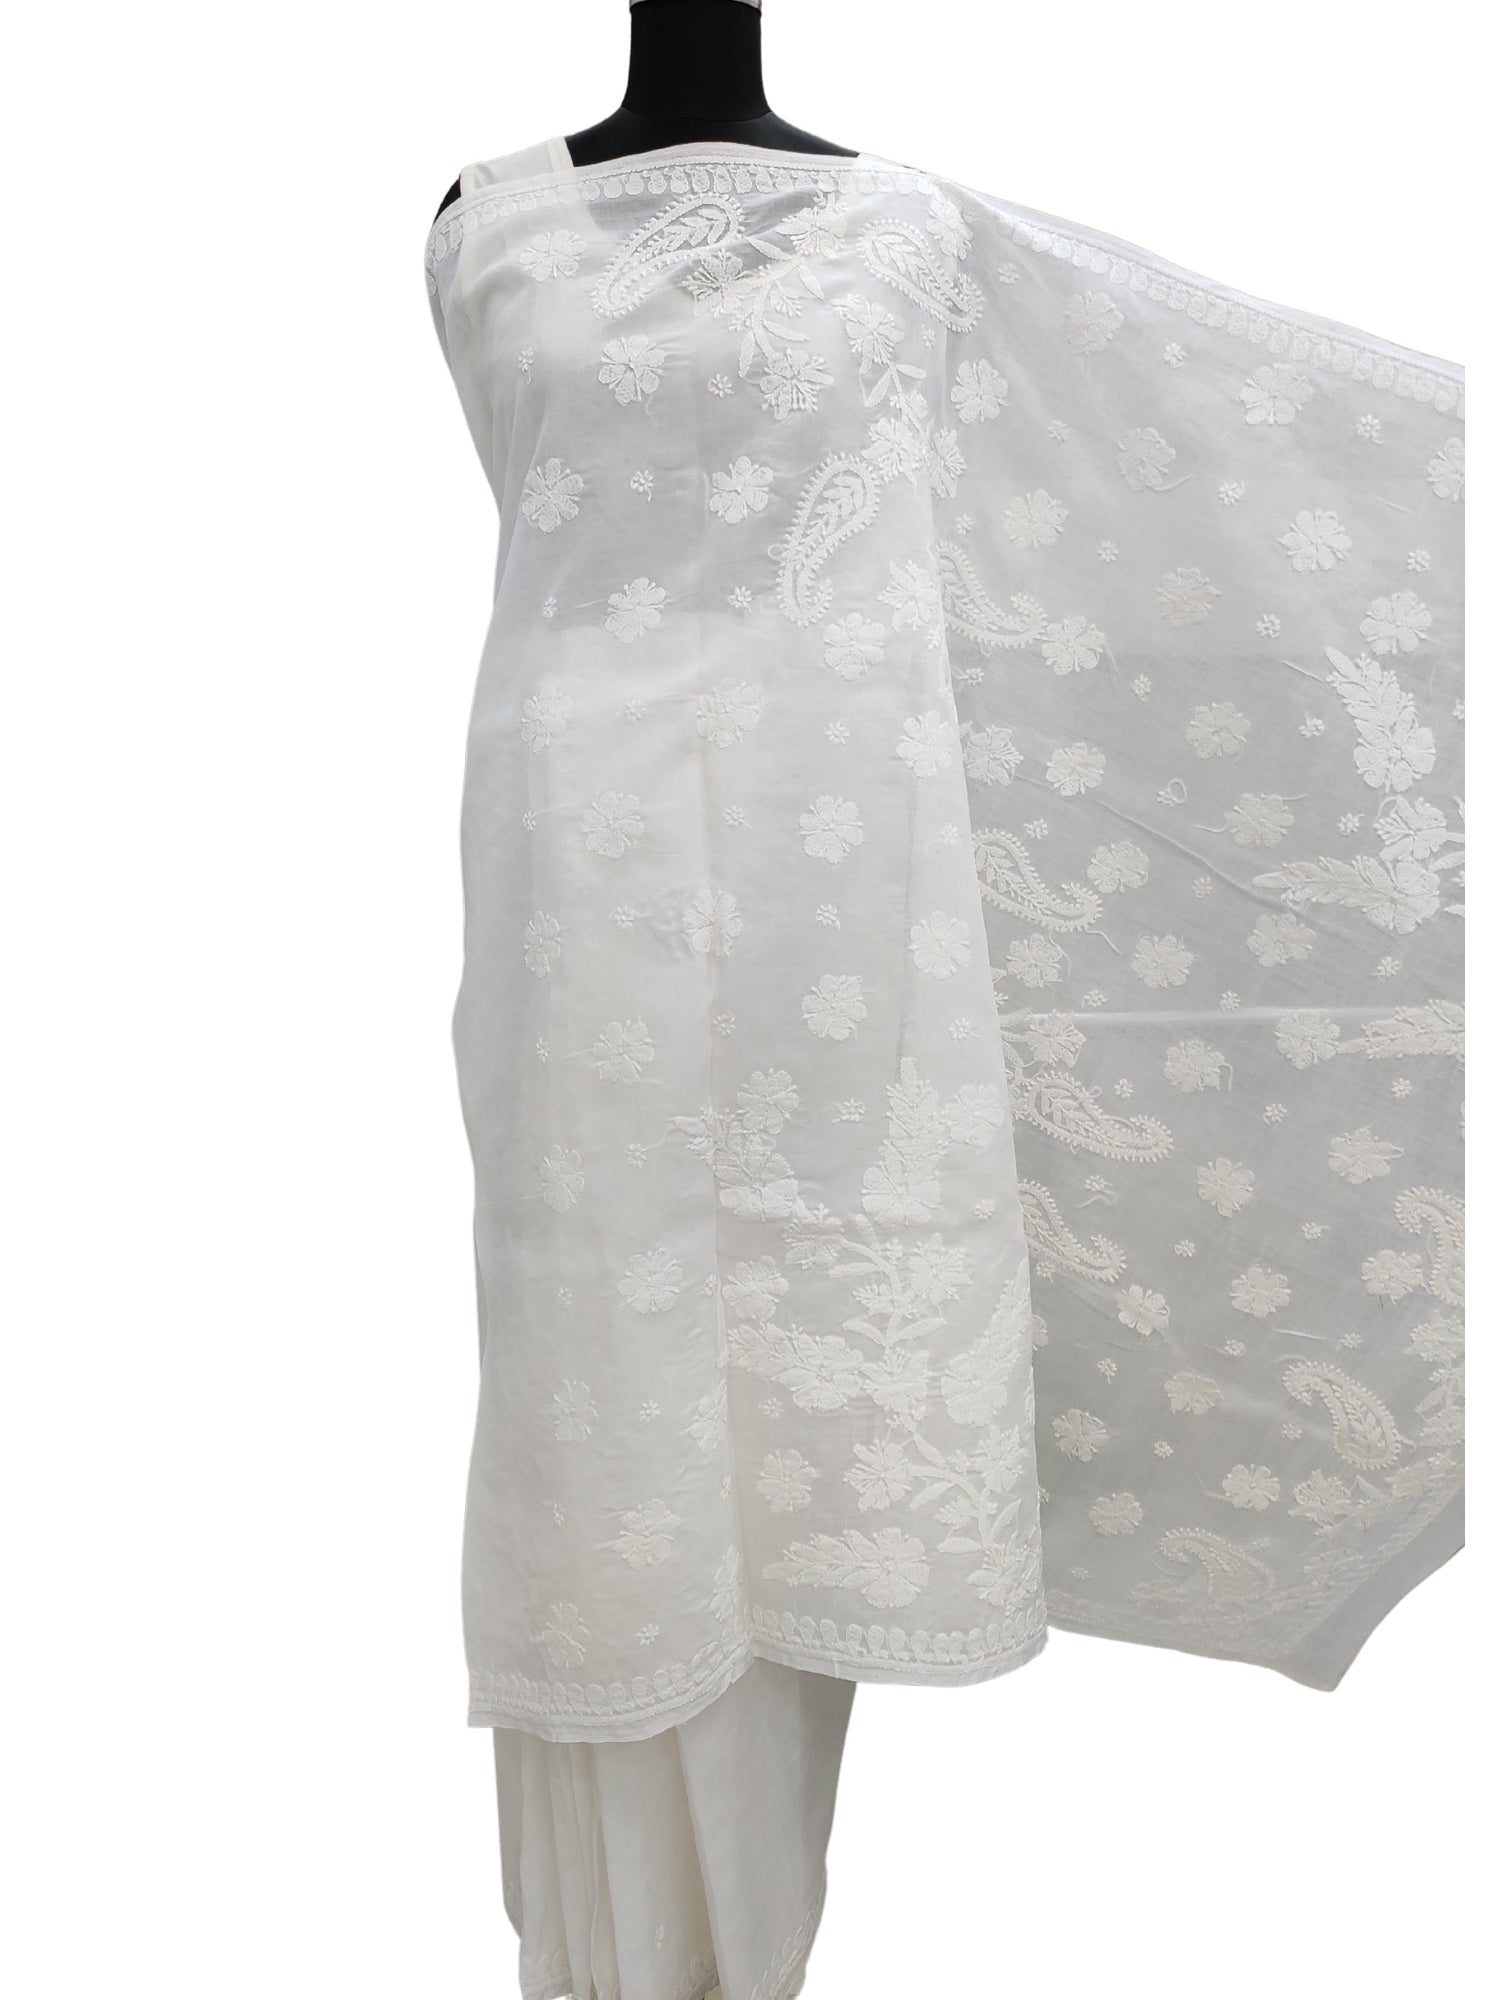 Shyamal Chikan Hand Embroidered White Cotton Lucknowi Chikankari Saree With Blouse Piece- S829